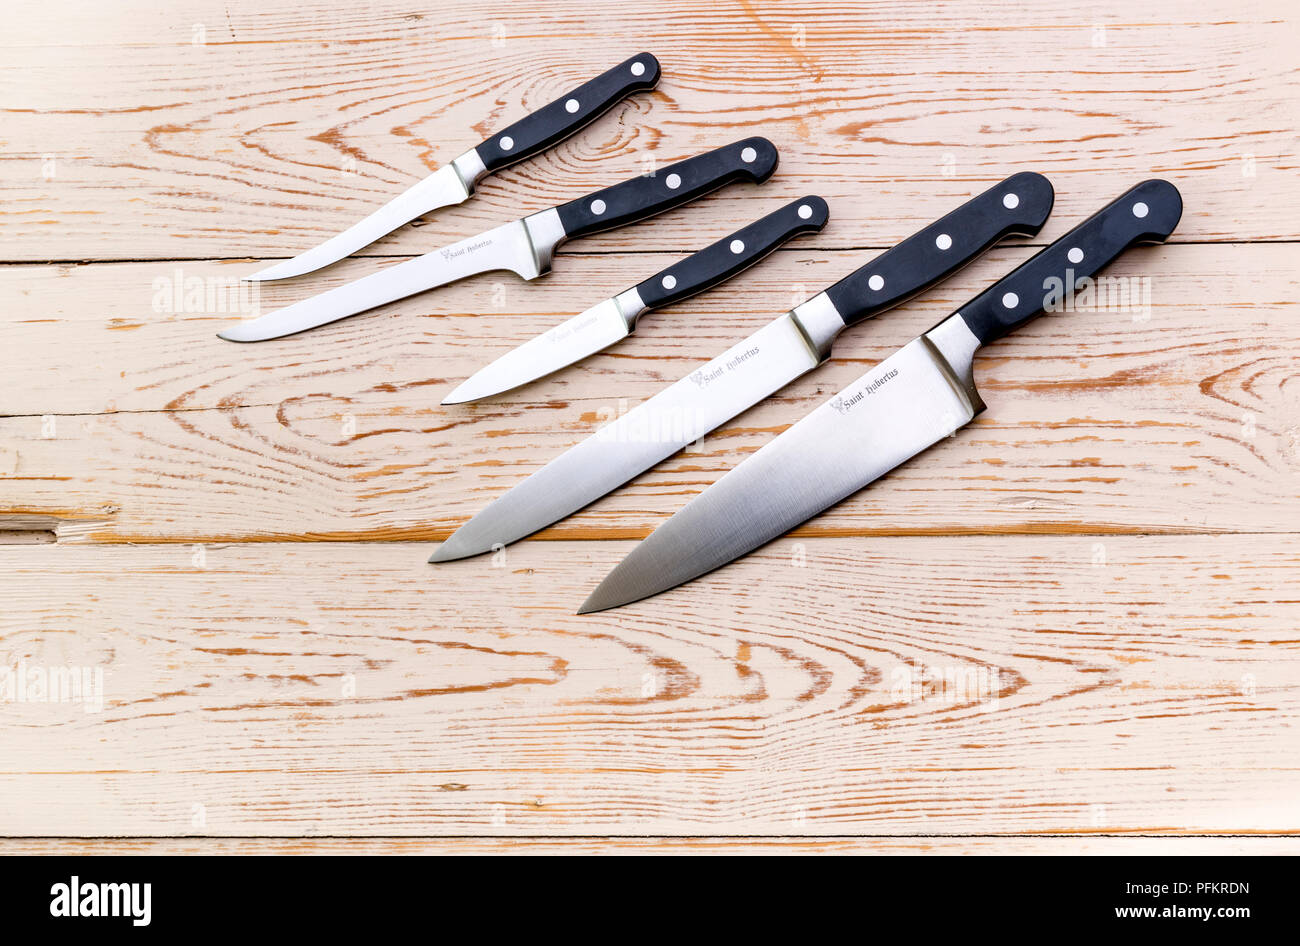 An assortment of various kitchen knives on a wooden background. Stock Photo